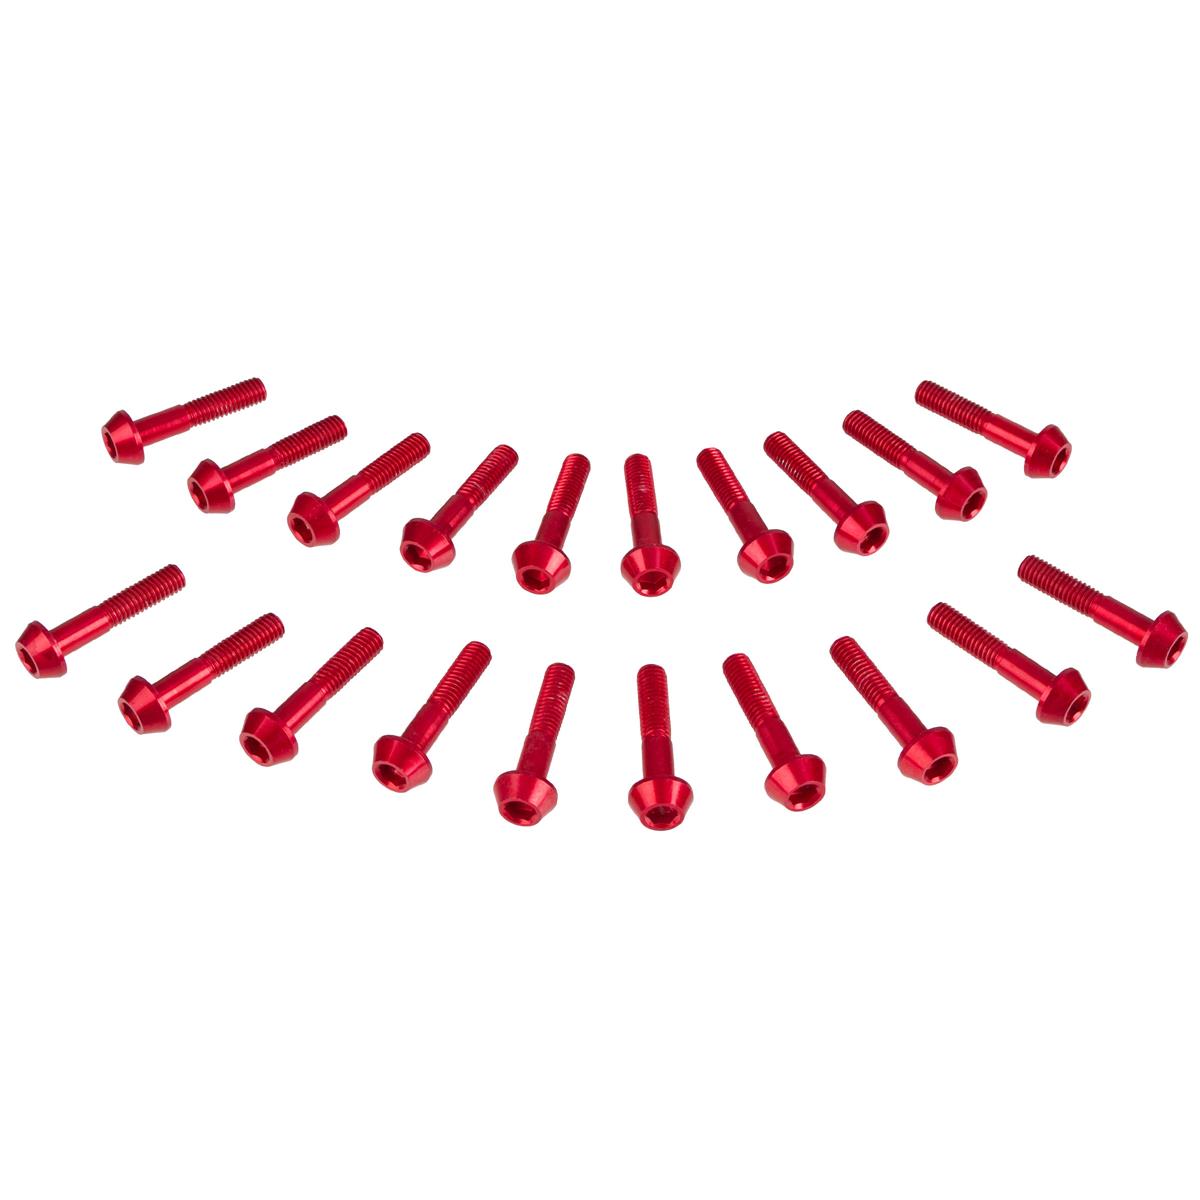 DRC Inner Hex Bolts  M6 x 30 mm, Red, 20-Pack